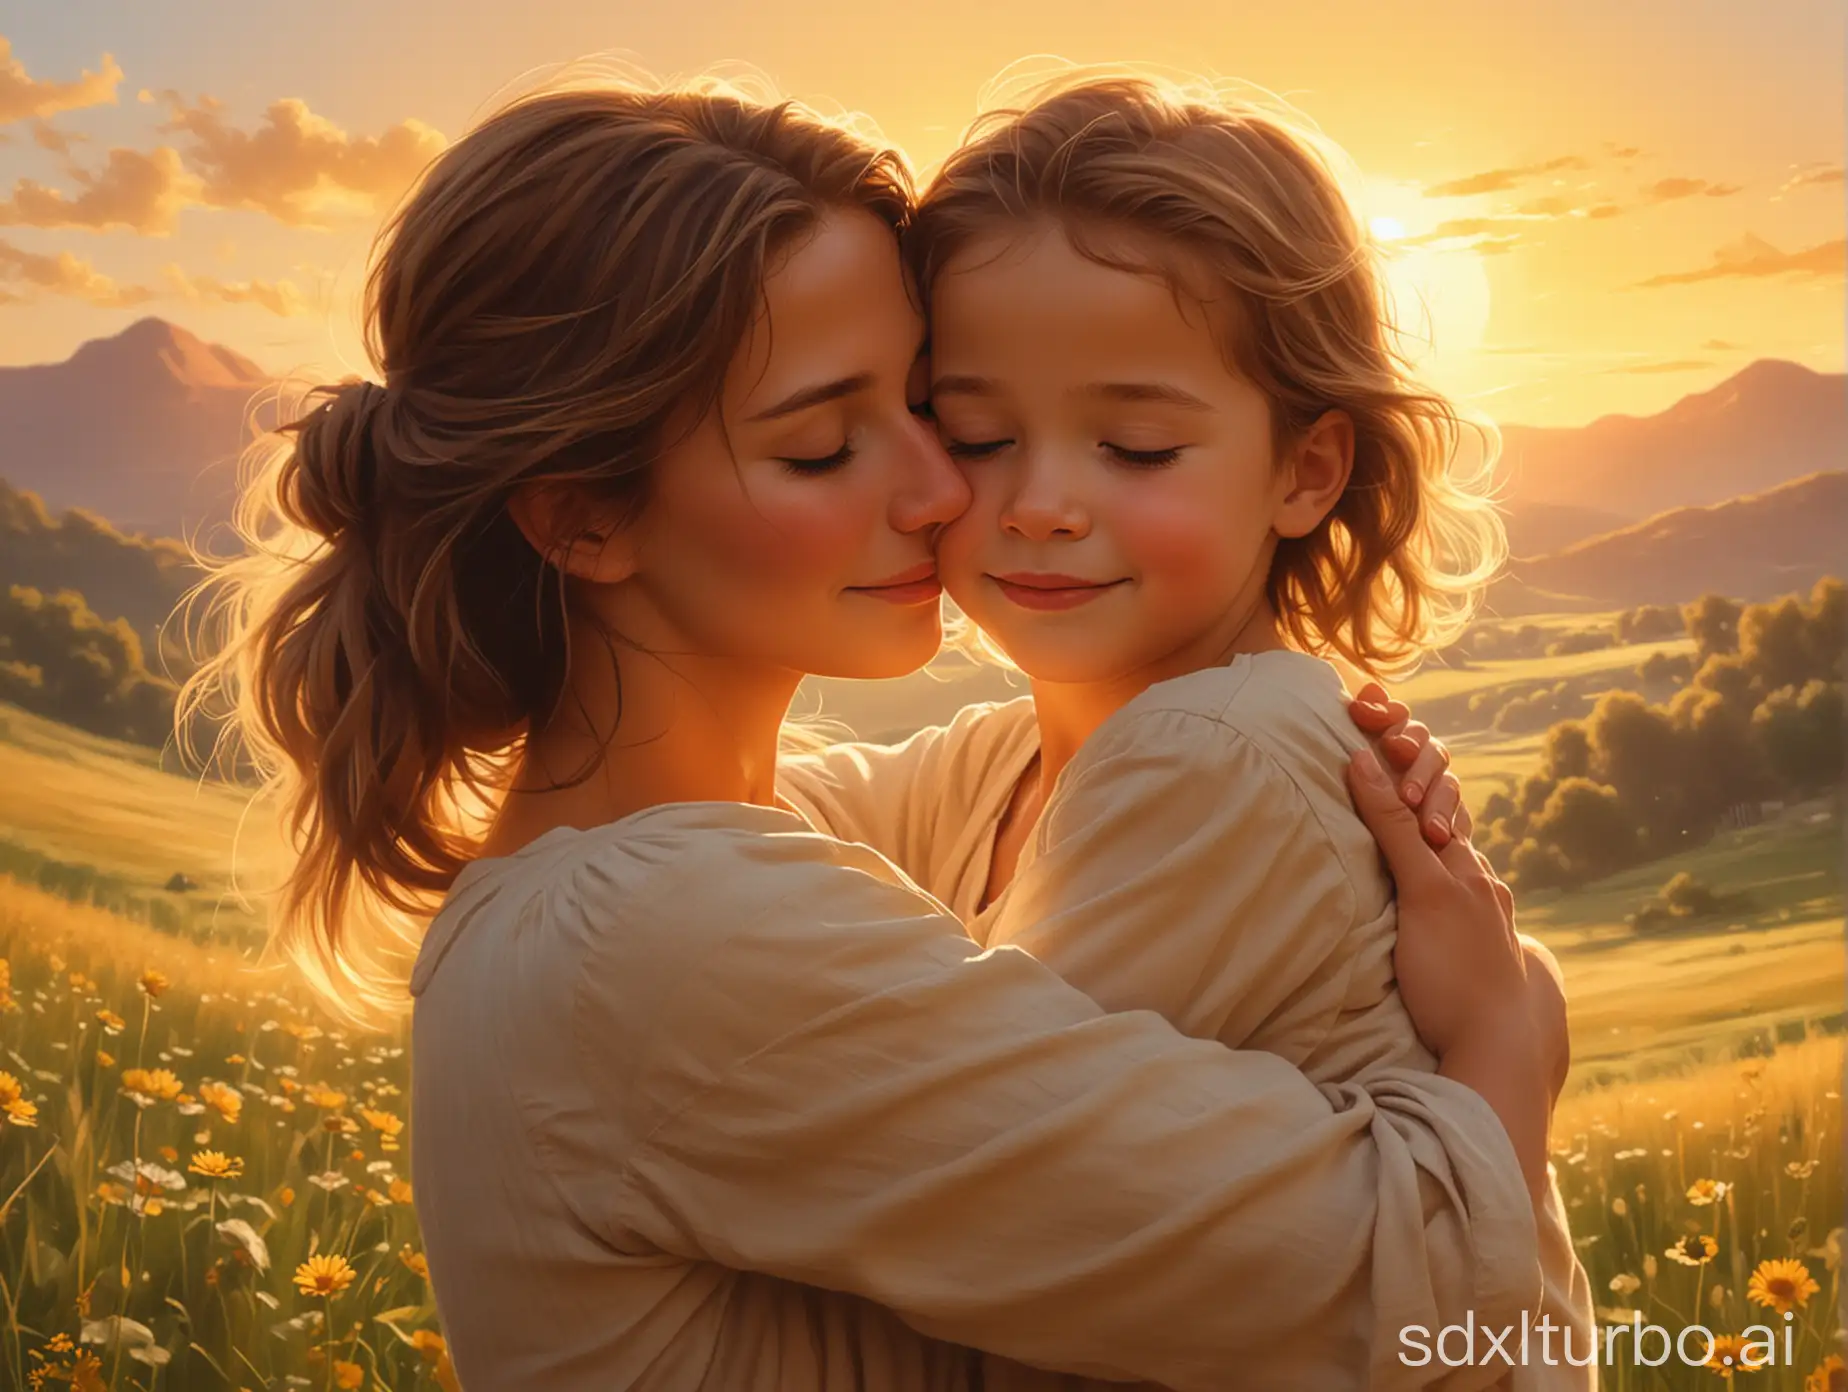 Mother-and-Child-Embracing-Tenderly-in-Serene-Meadow-Sunset-Illustration